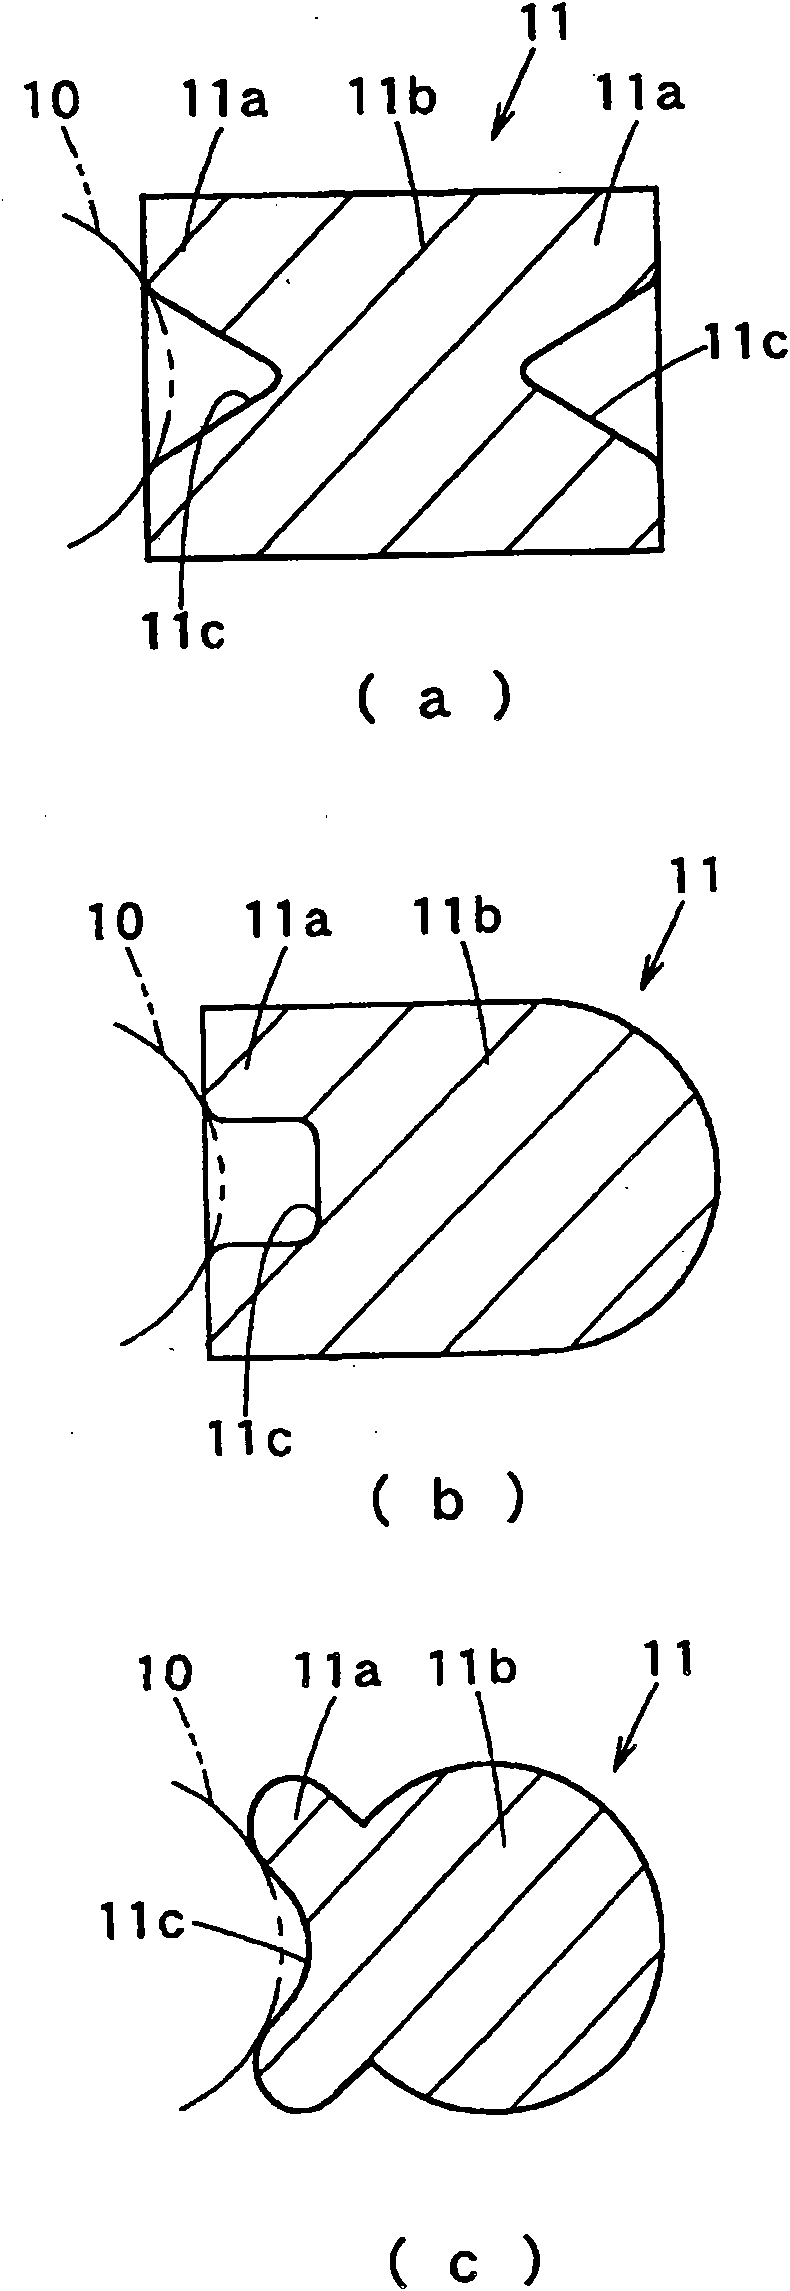 Pretensioner, seat belt retractor having the same, and seat belt apparatus provided therewith